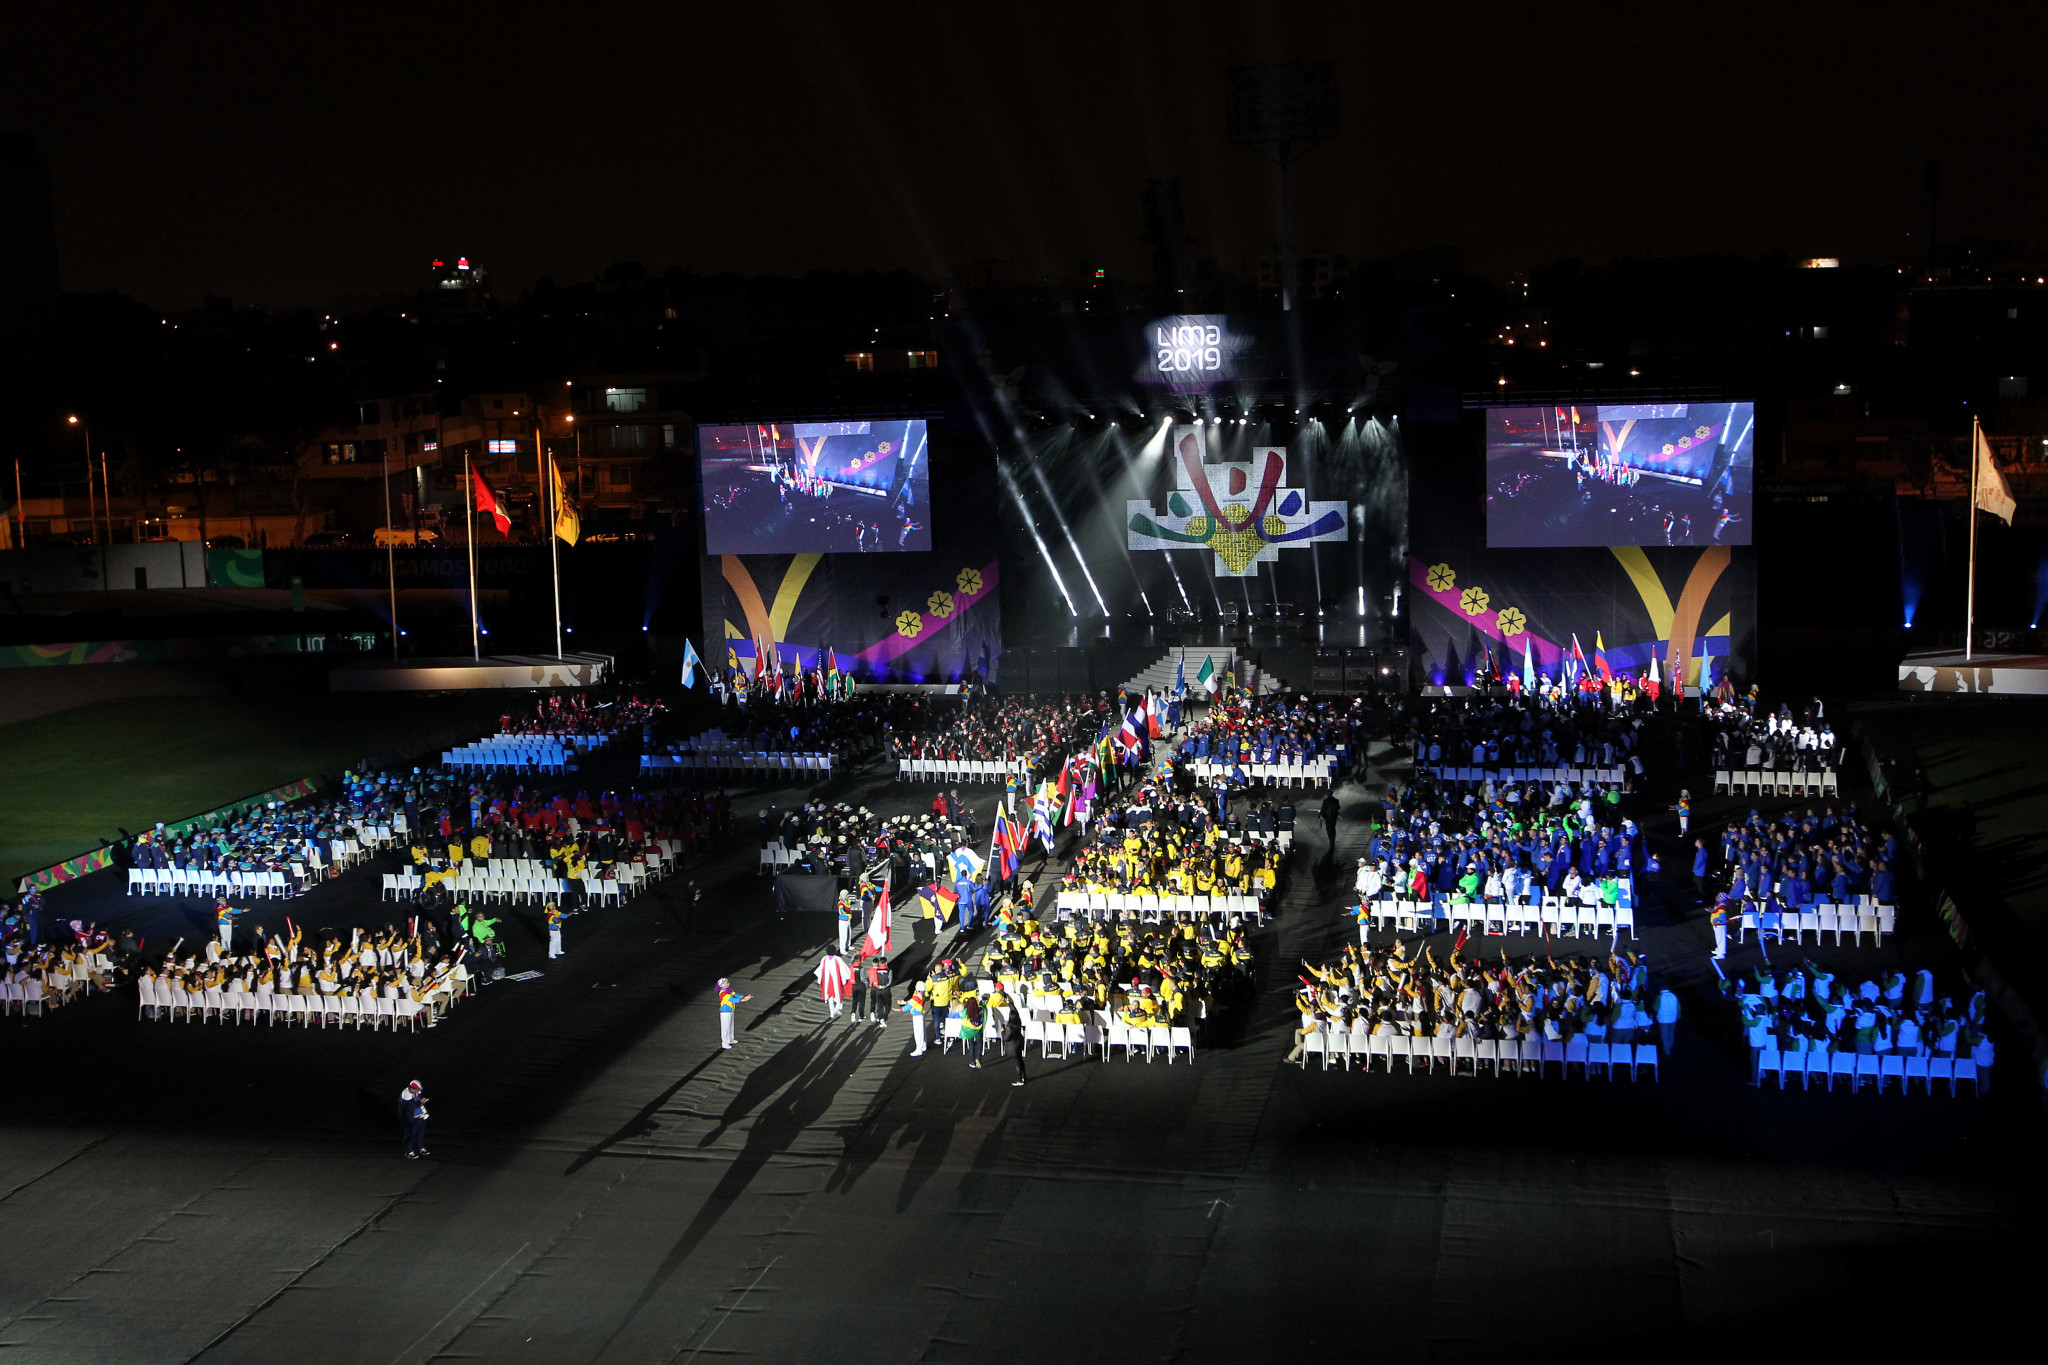 The end of the Lima 2019 Parapan American Games was marked by the Closing Ceremony ©Getty Images